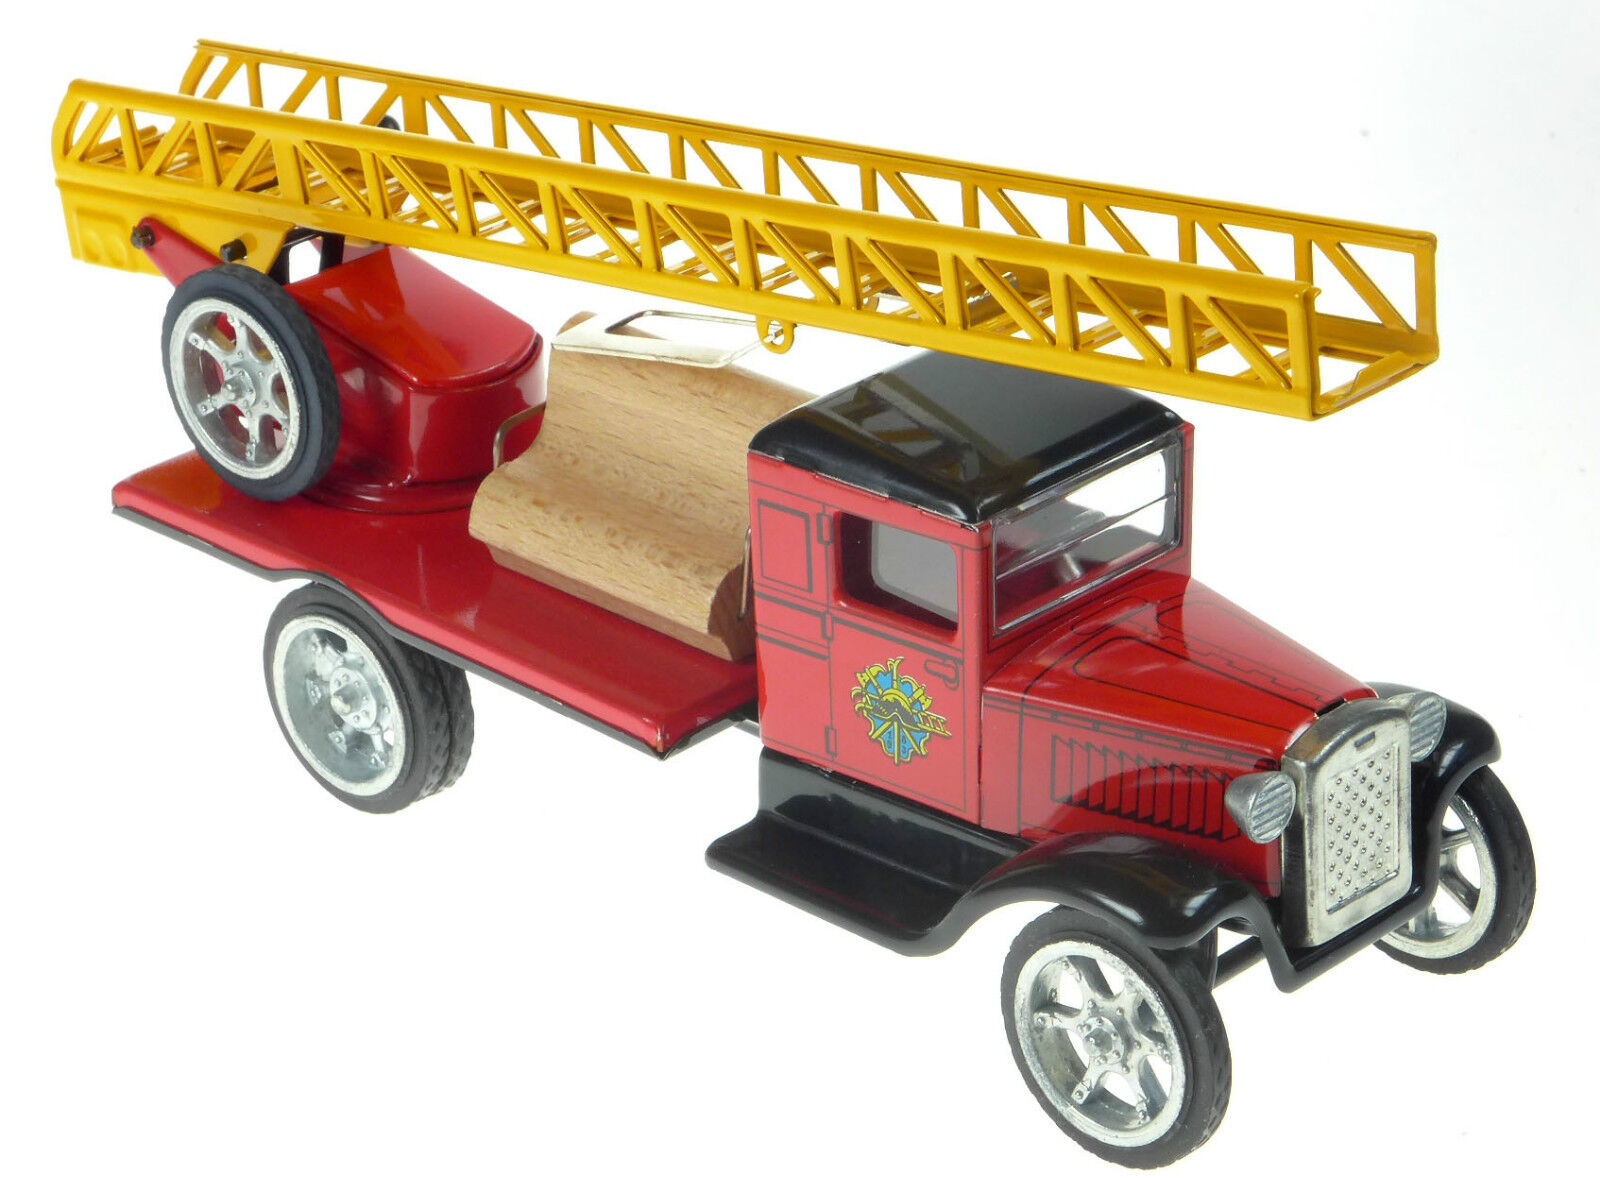 HAWKEYE VINTAGE STYLE FIRE TRUCK WITH TURNTABLE EXTENDABLE  LADDER EUROPEAN MADE